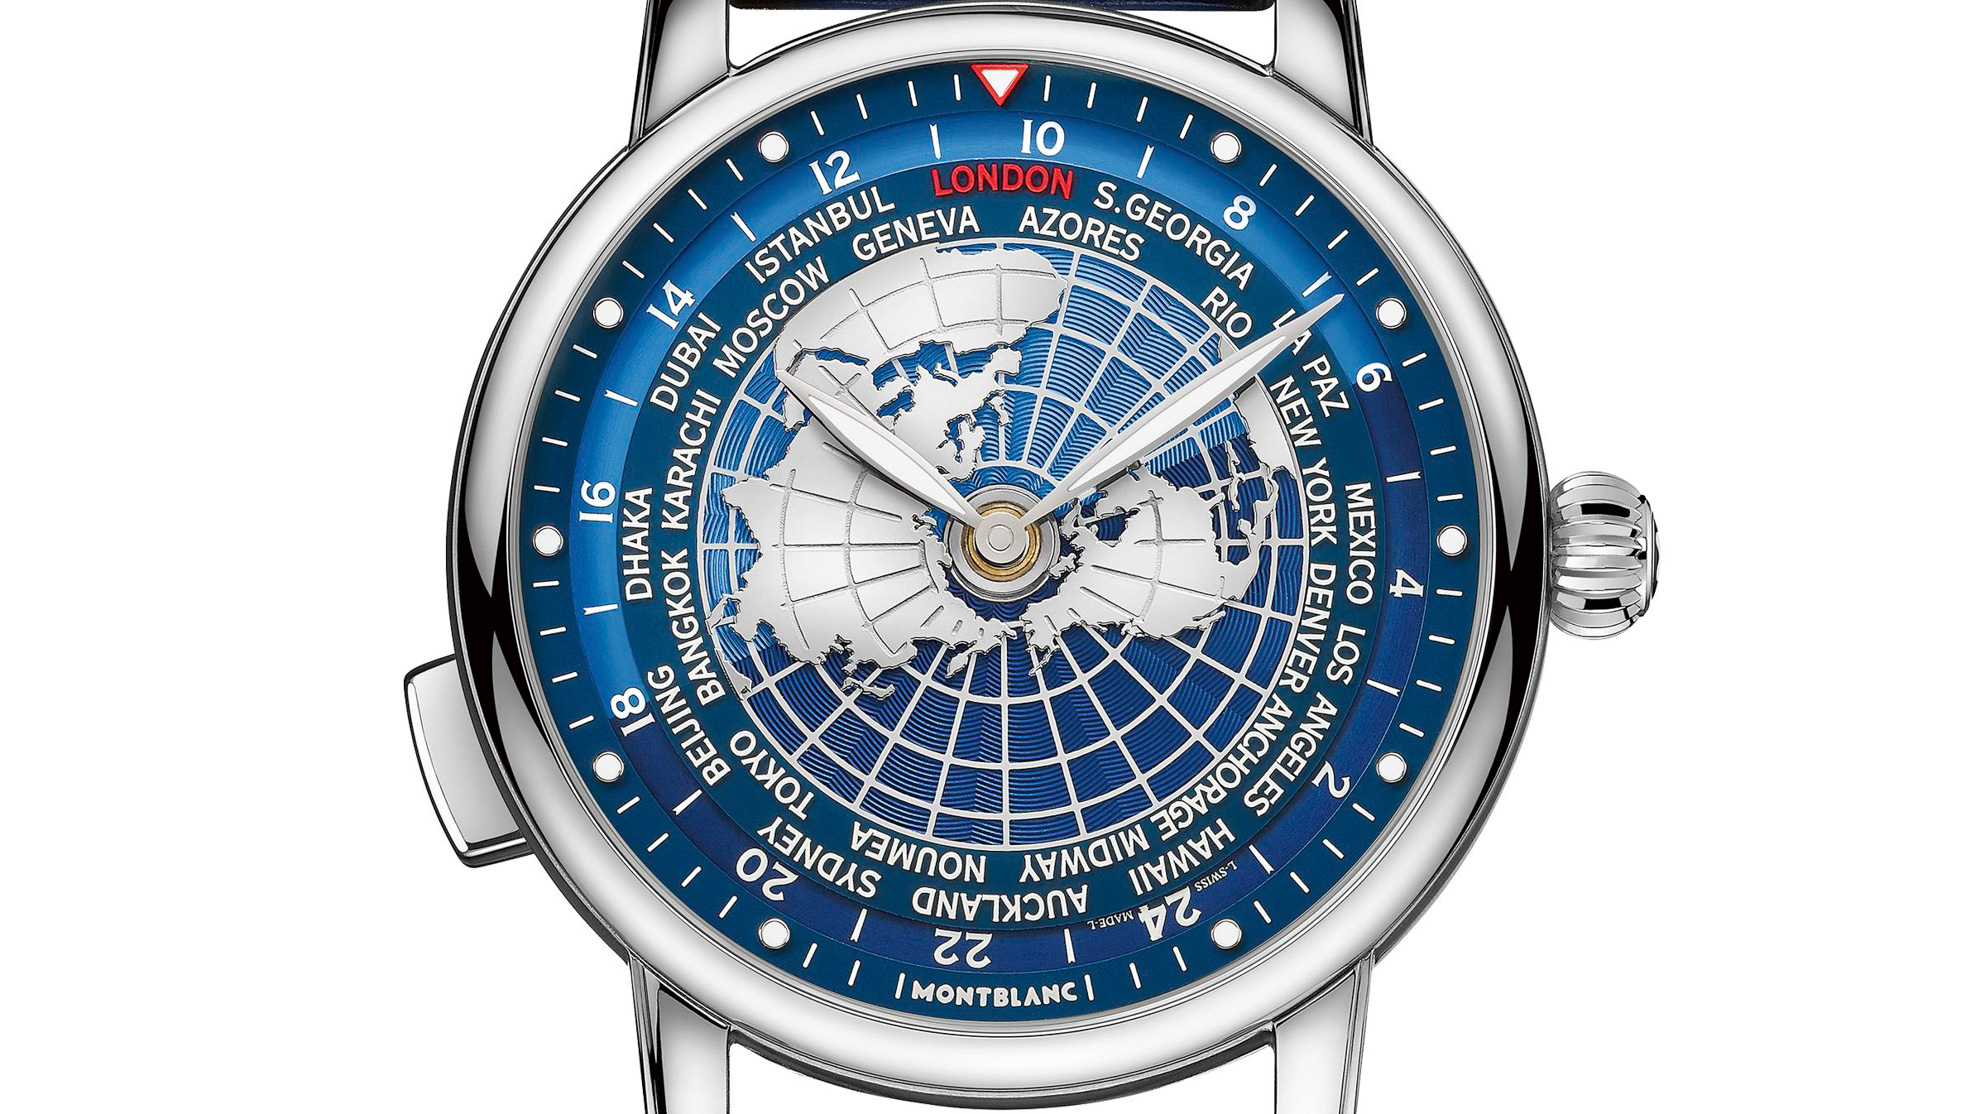 First Look: Montblanc Updates The Star Legacy Orbis Terrarum With New Case, Dial, and Price